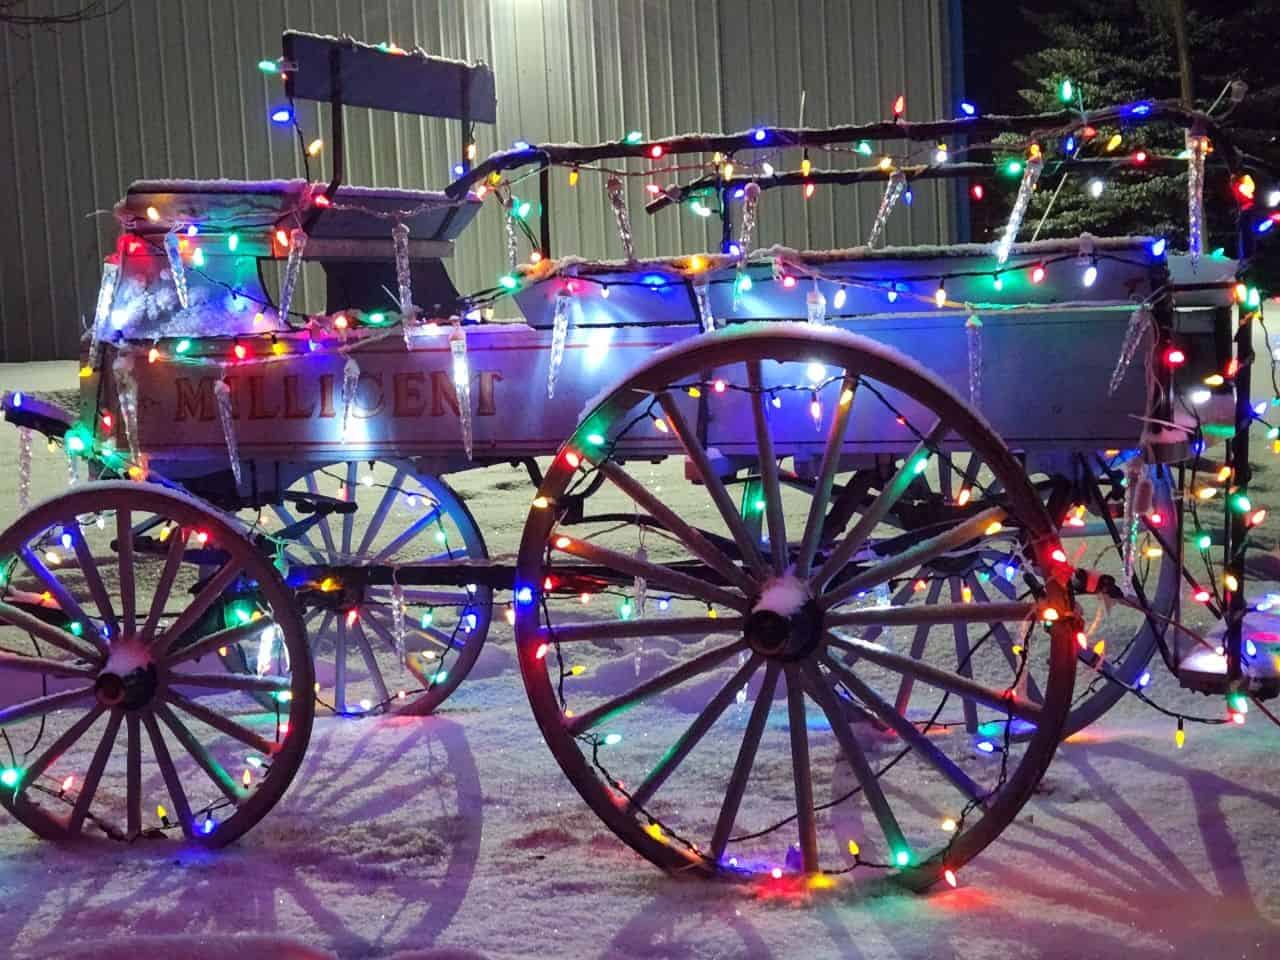 A carriage decorated for Christmas with lights at the Brooks and District Museum in Brooks Alberta Canada.